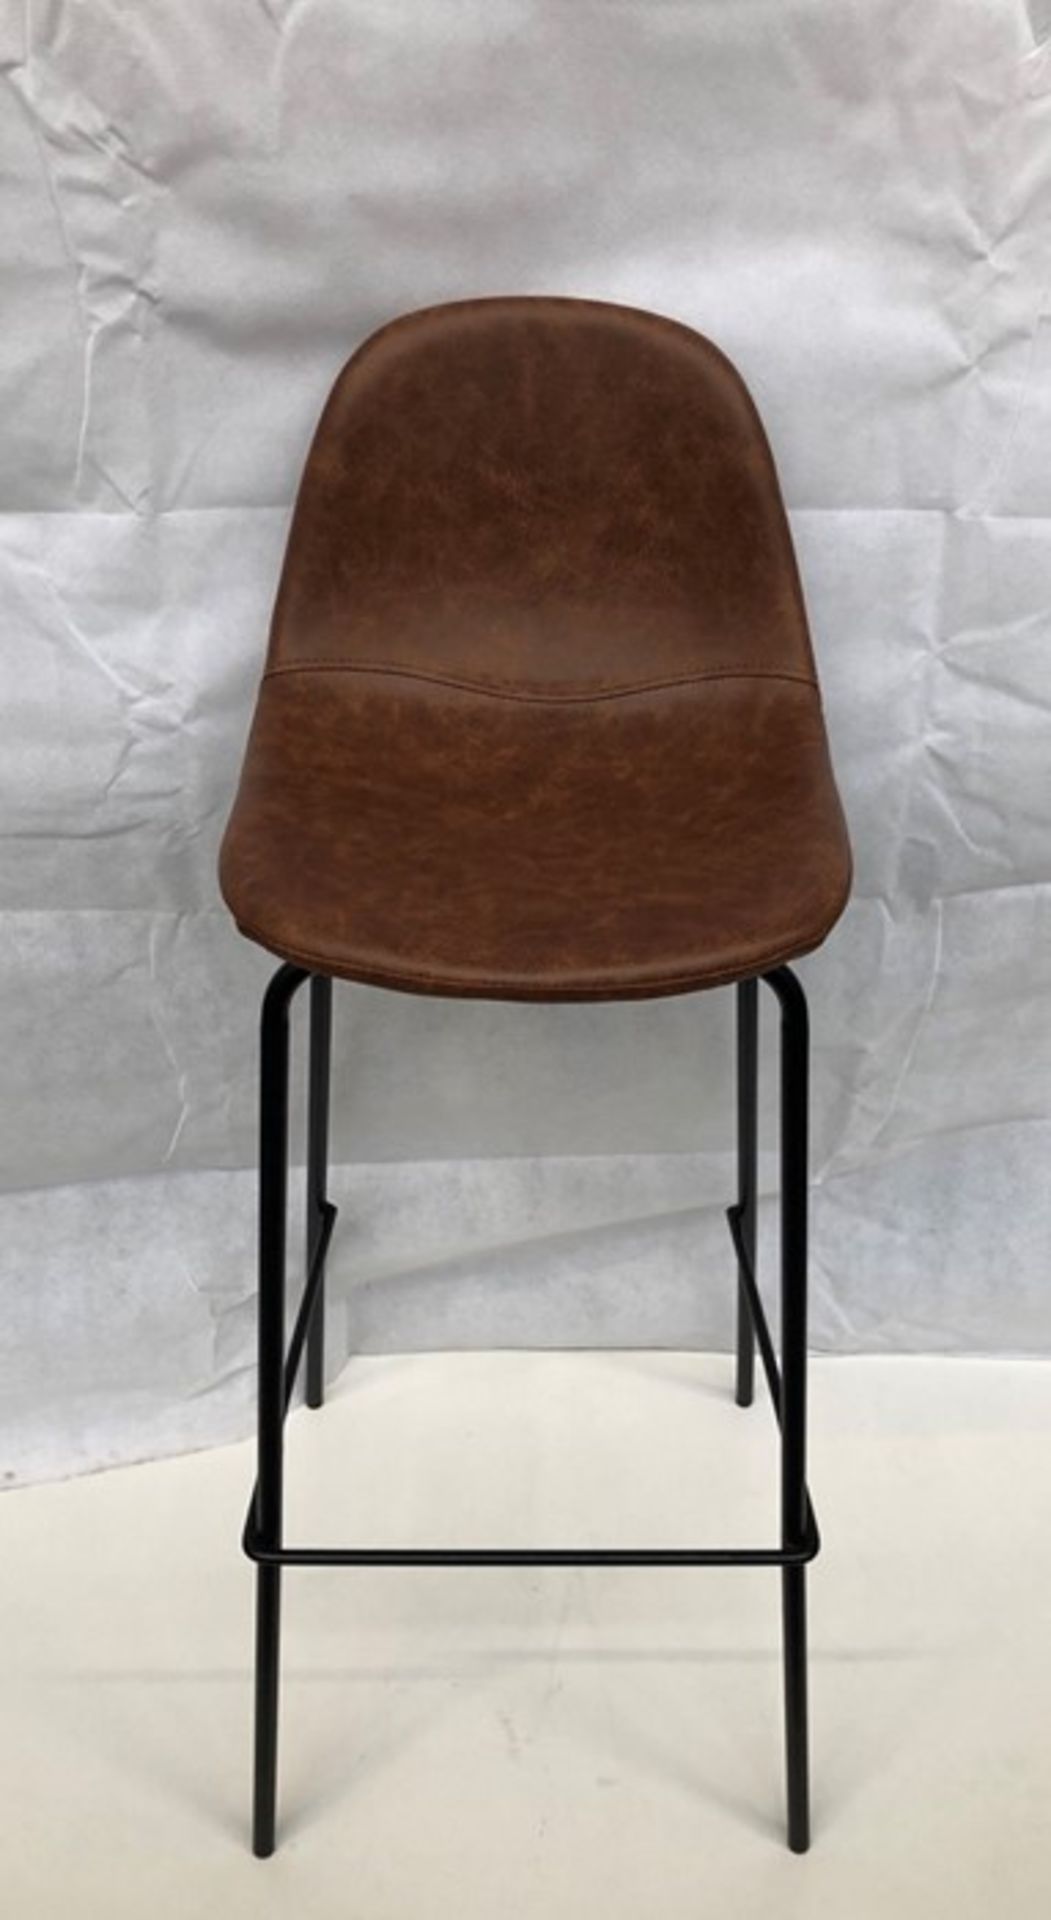 1 GRADE A ASSEMBLED LA REDOUTE LEATHER BAR STOOL / RRP £185.00 (PUBLIC VIEWING AVAILABLE)